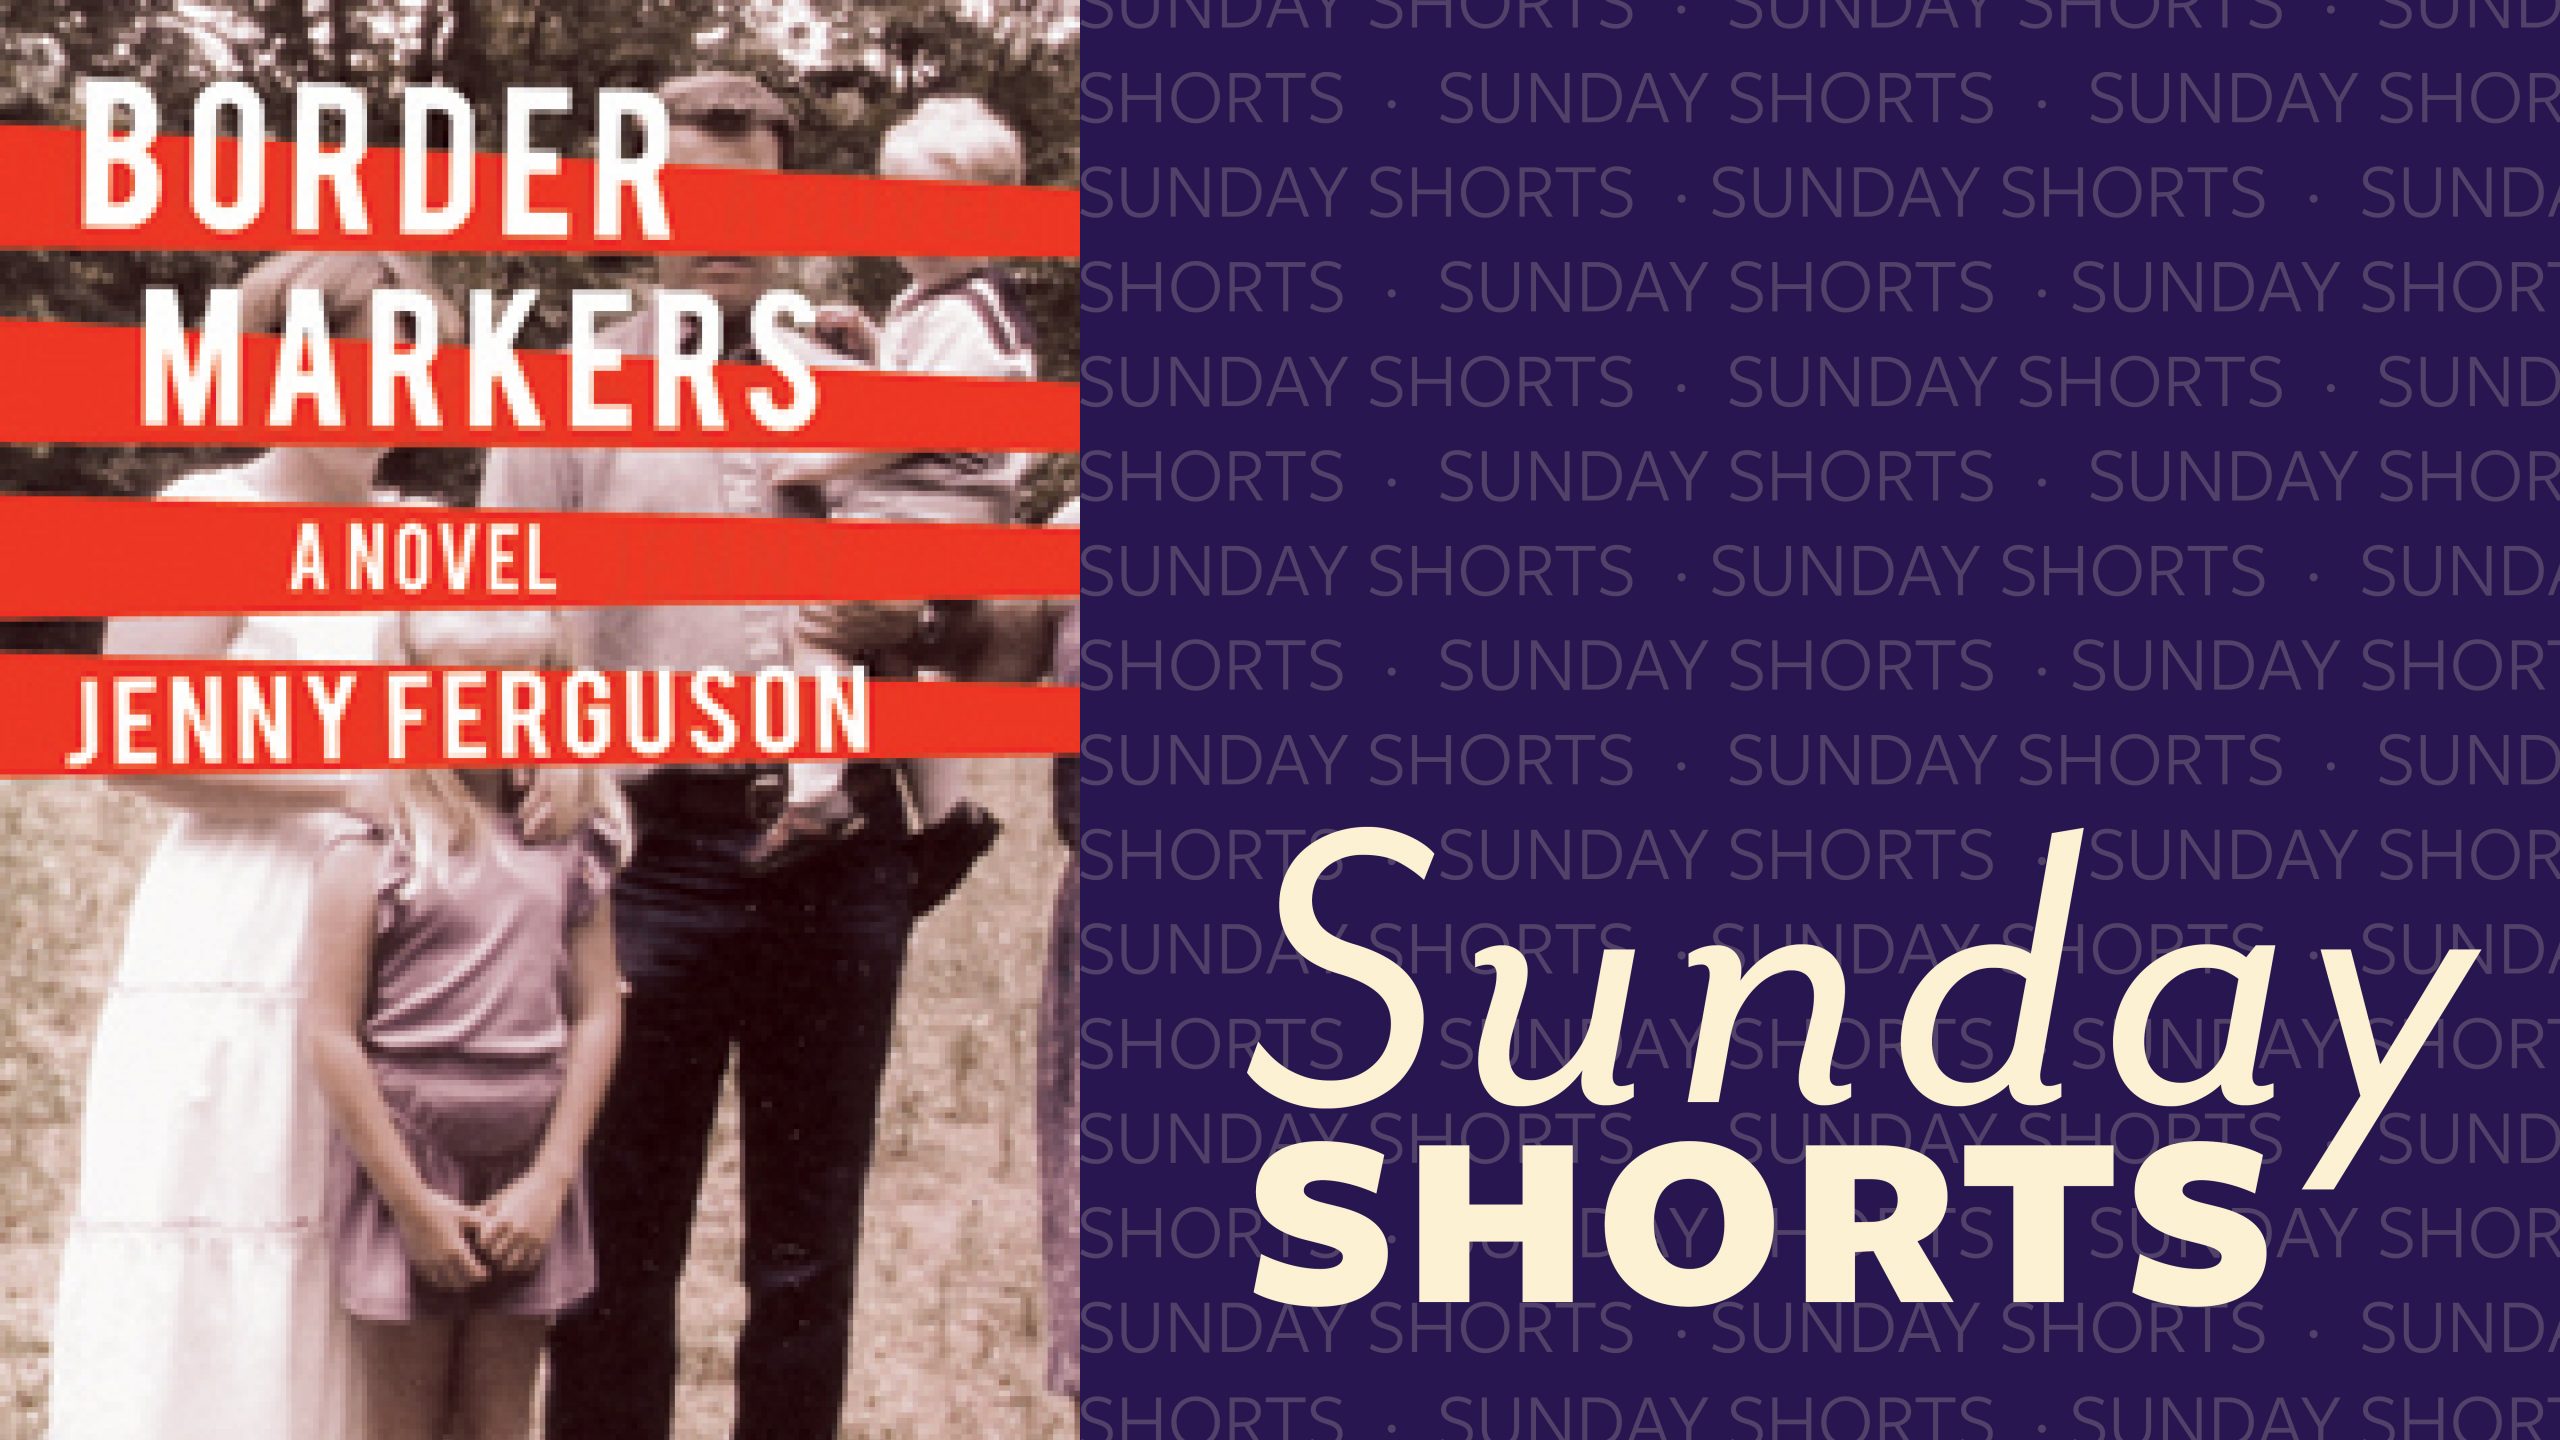 Sunday Shorts with cover of Border Markers